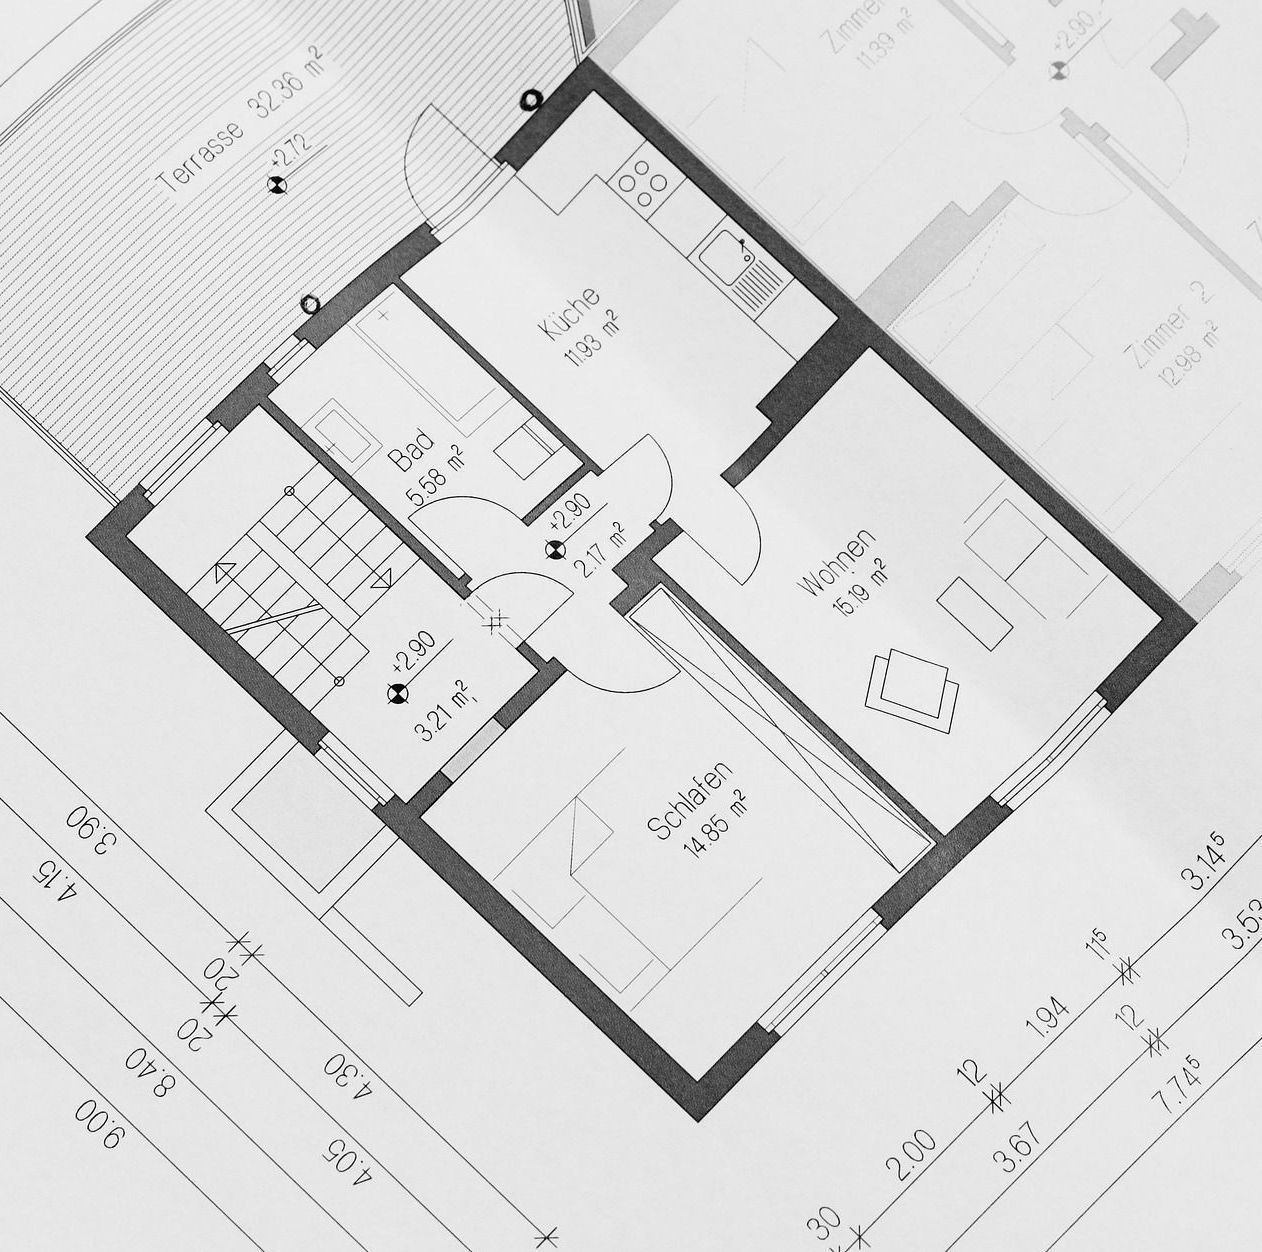 close up image of an apartment floor plan